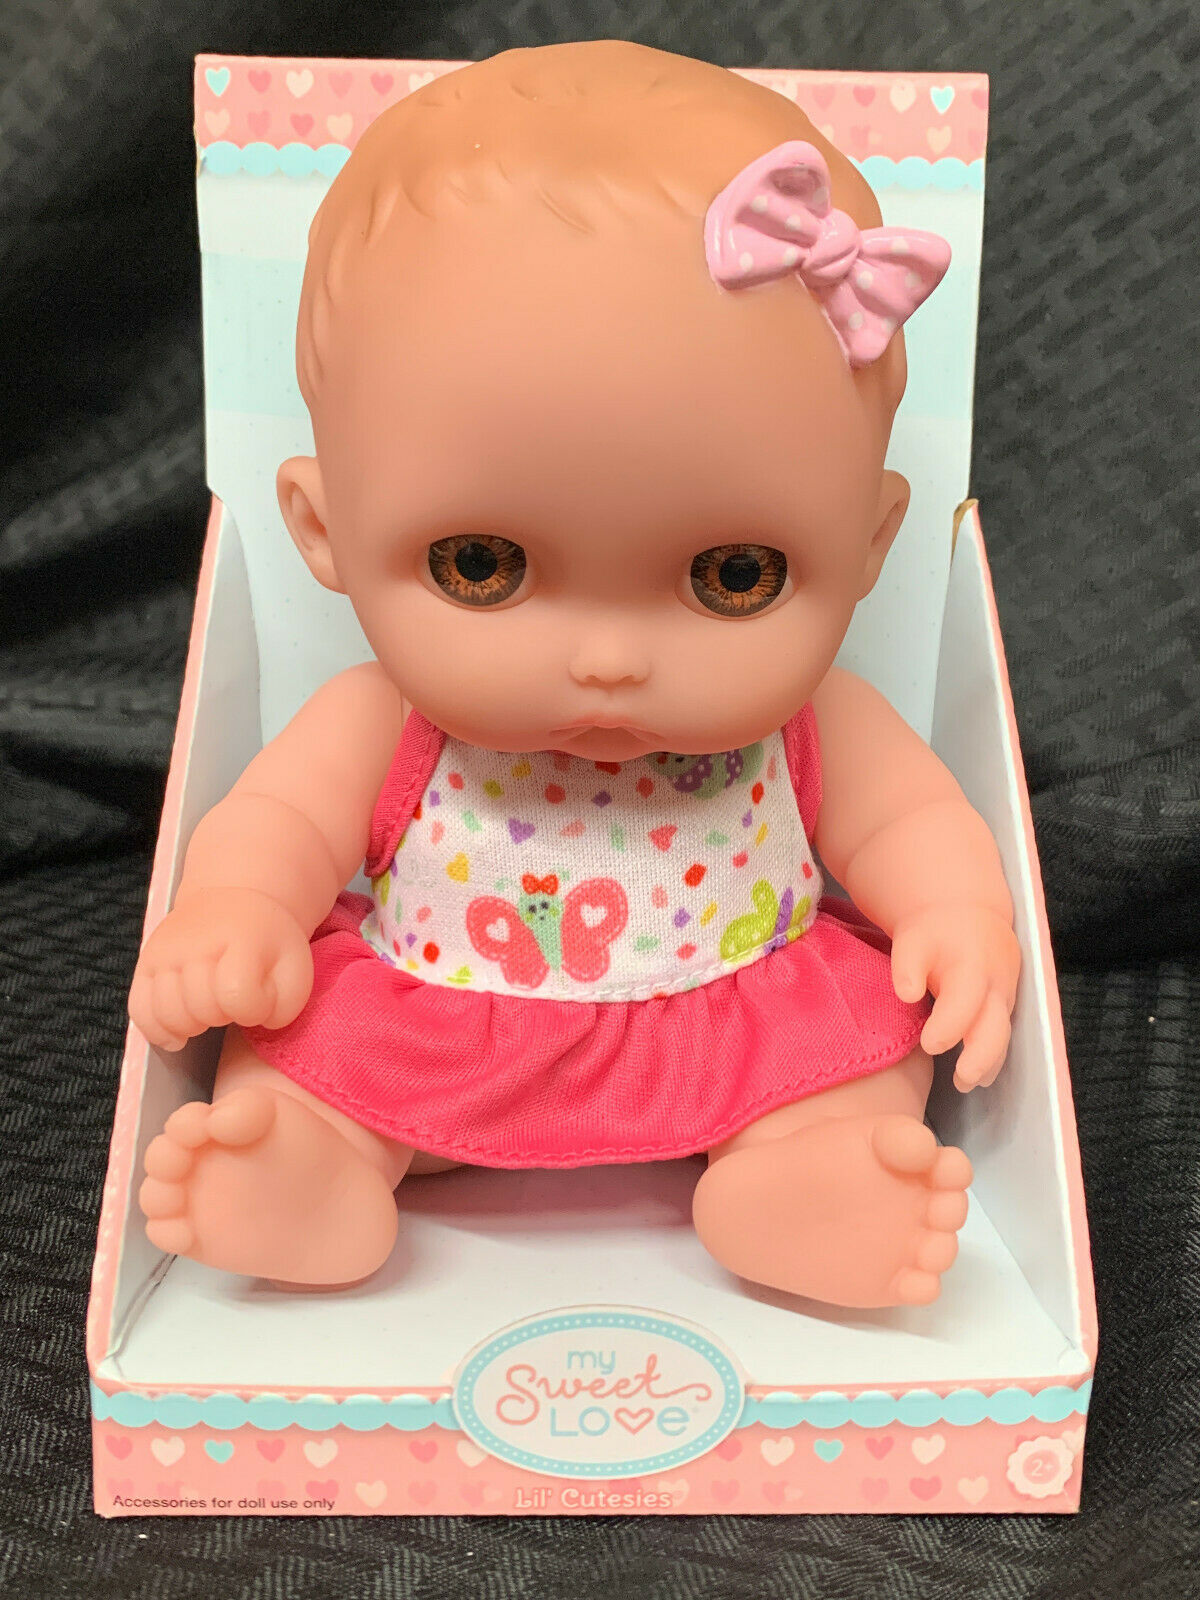 My Sweet Love Lil' Cutesies Mimi Brown Eyes Baby Doll New Pink Outfit